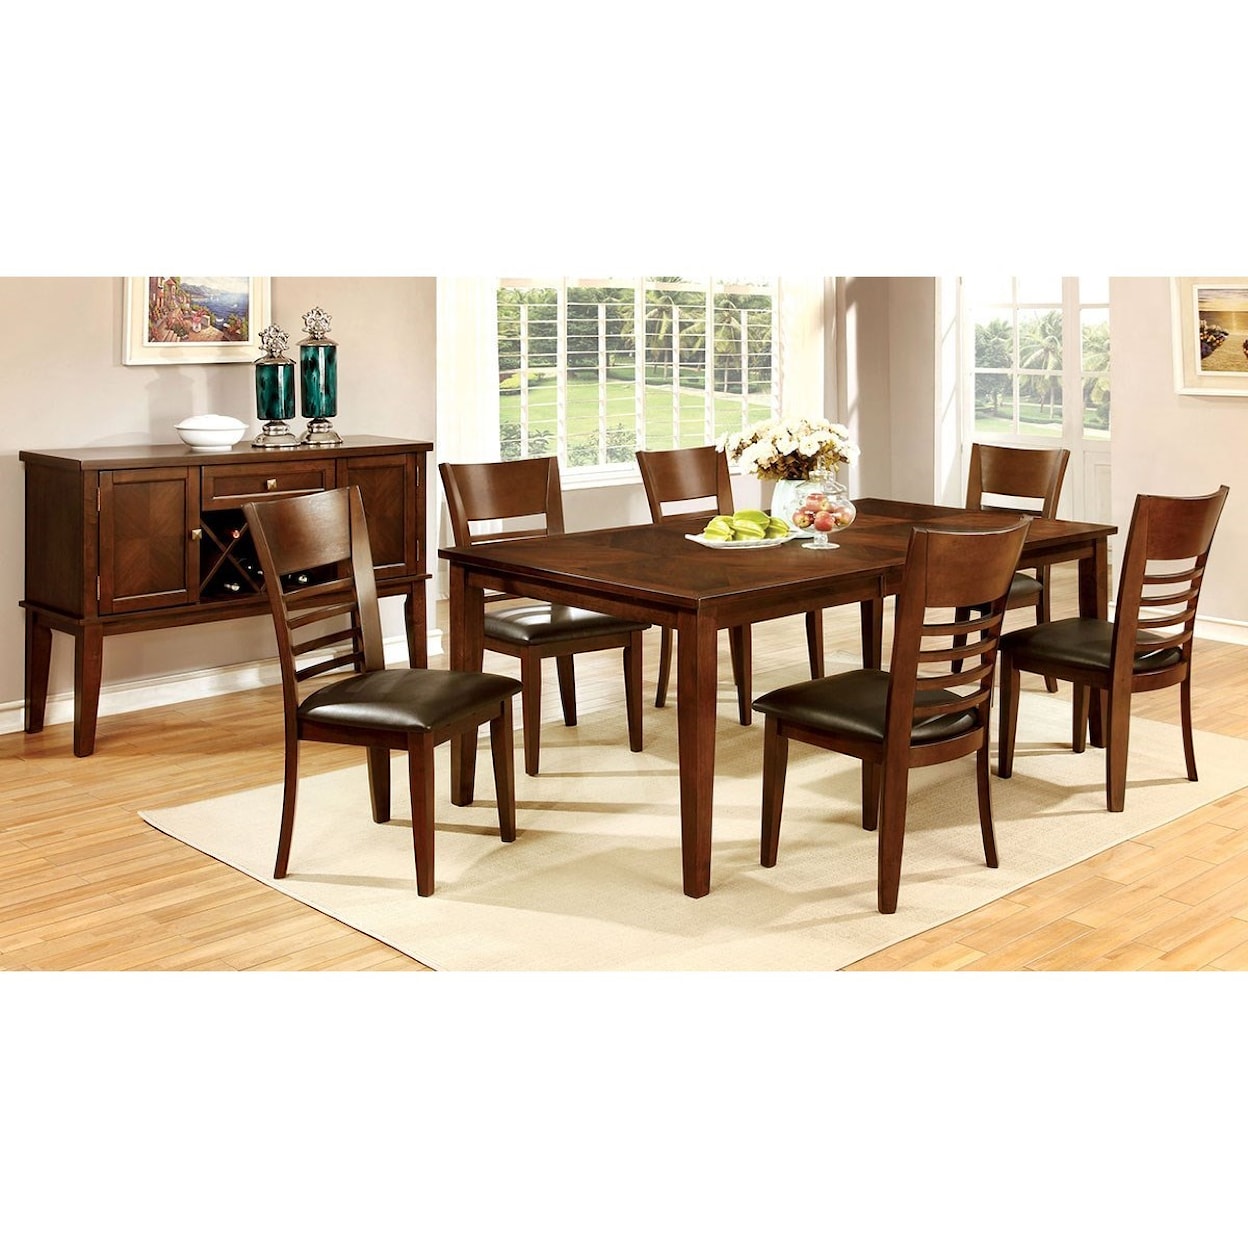 Furniture of America Hillsview Dining Table